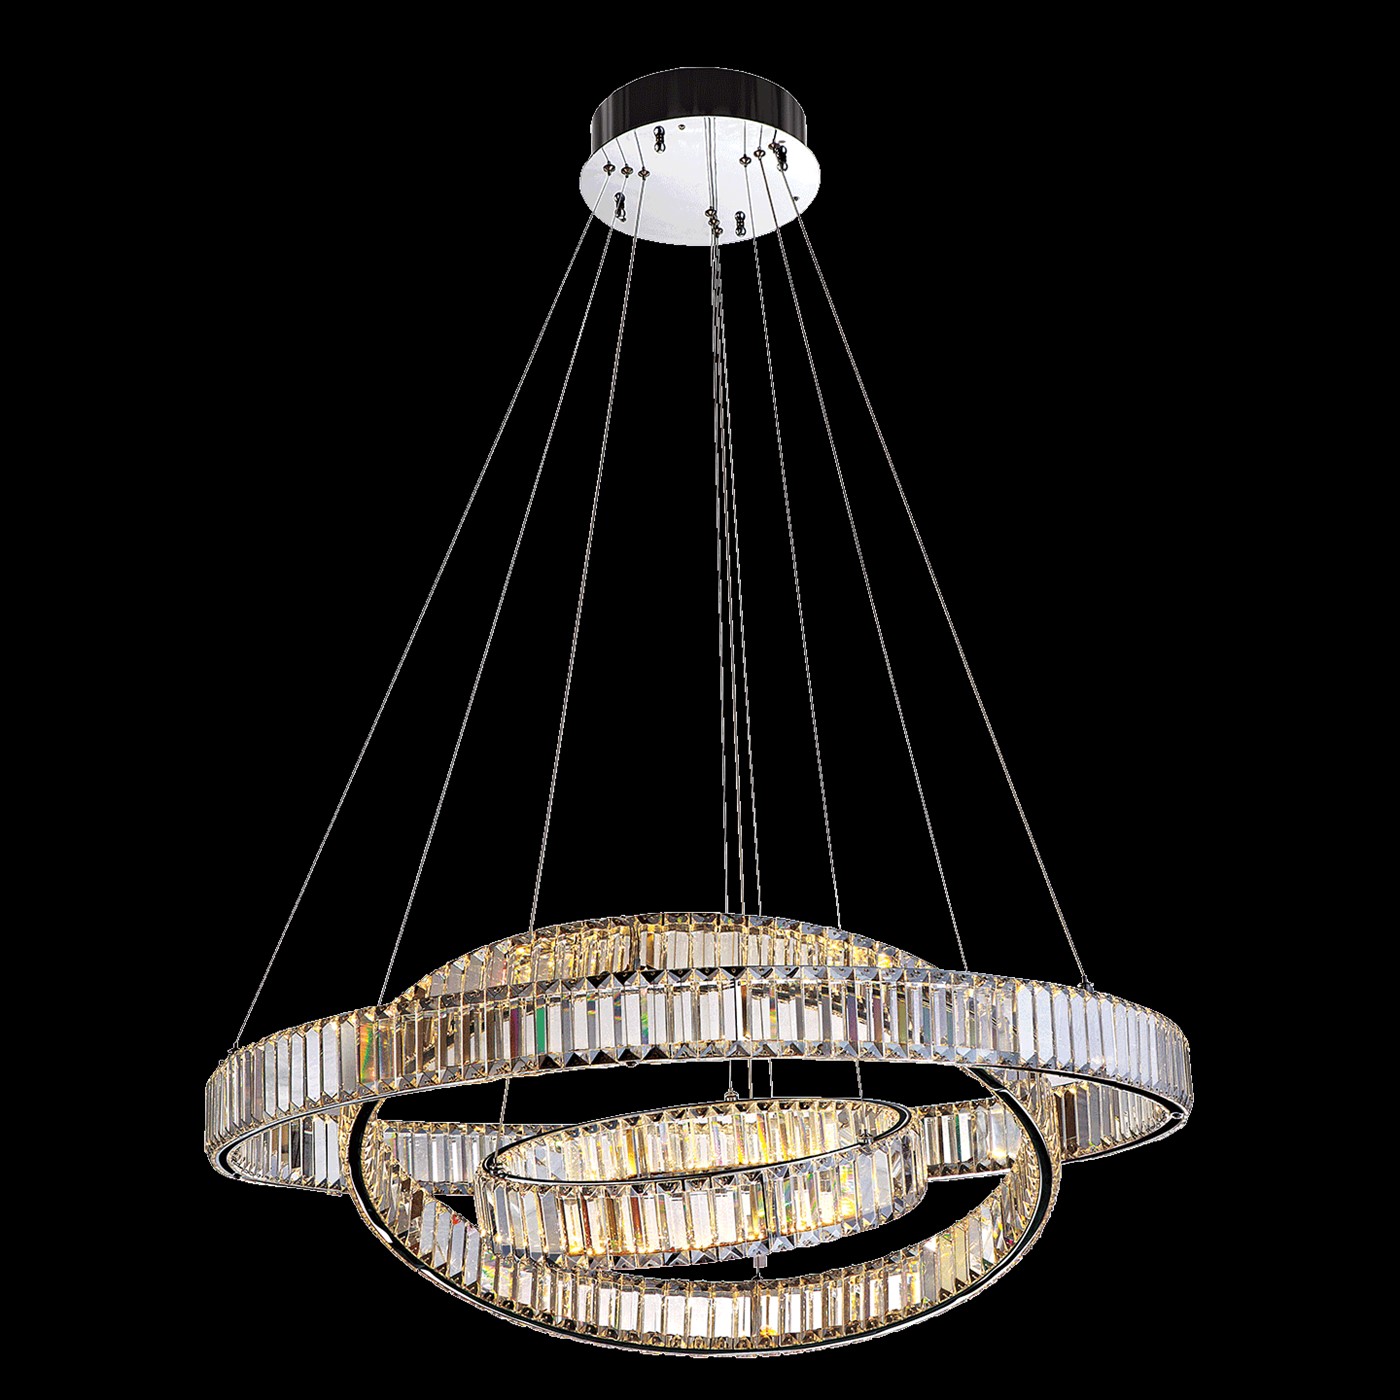 Jaquar Galaxy chandelier with asfour almaaza crystal